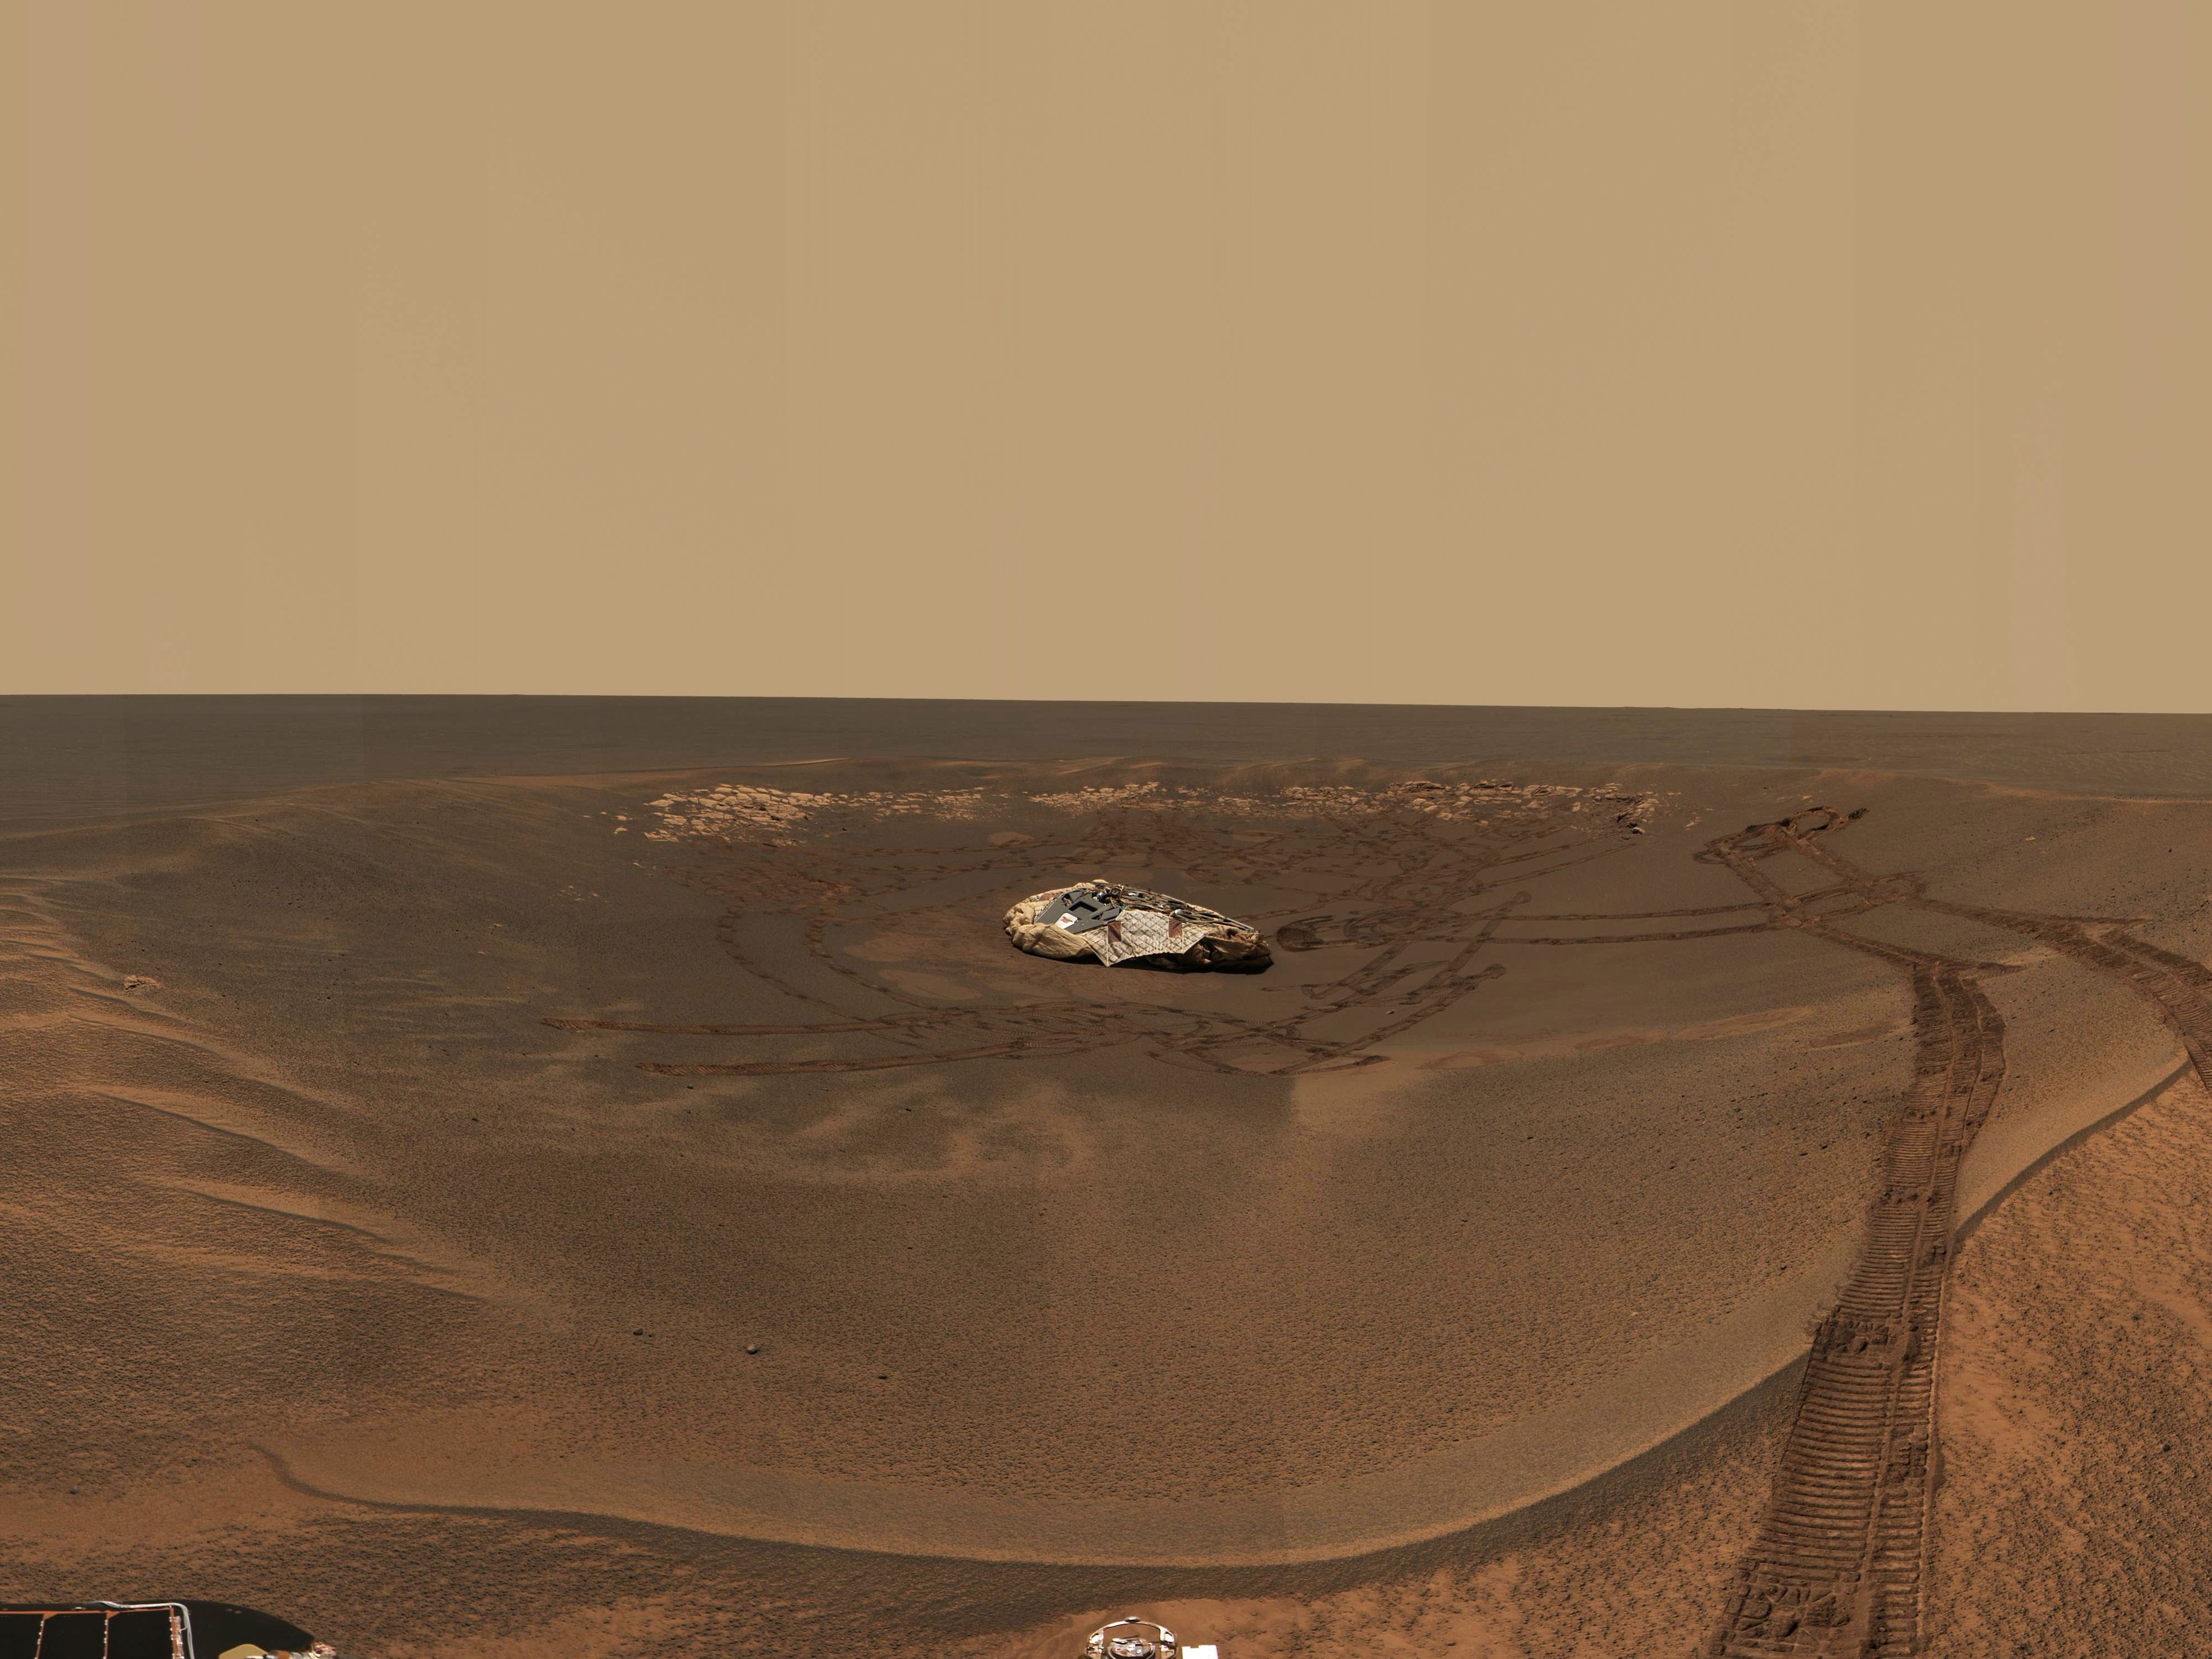 A landscape on Mars shows the horizon cutting across the middle of the photo, and a vast, empty desert of orange, brown, and rust stretching into the distance. The cloudless, hazy sky above is a pale tan color. In the foreground is a wide depression in the terrain, with a deflated, cream-colored bag lying in the middle, surrounded by wheel tracks, with one set running out of the crater toward the viewer and extending off the bottom of the image frame.